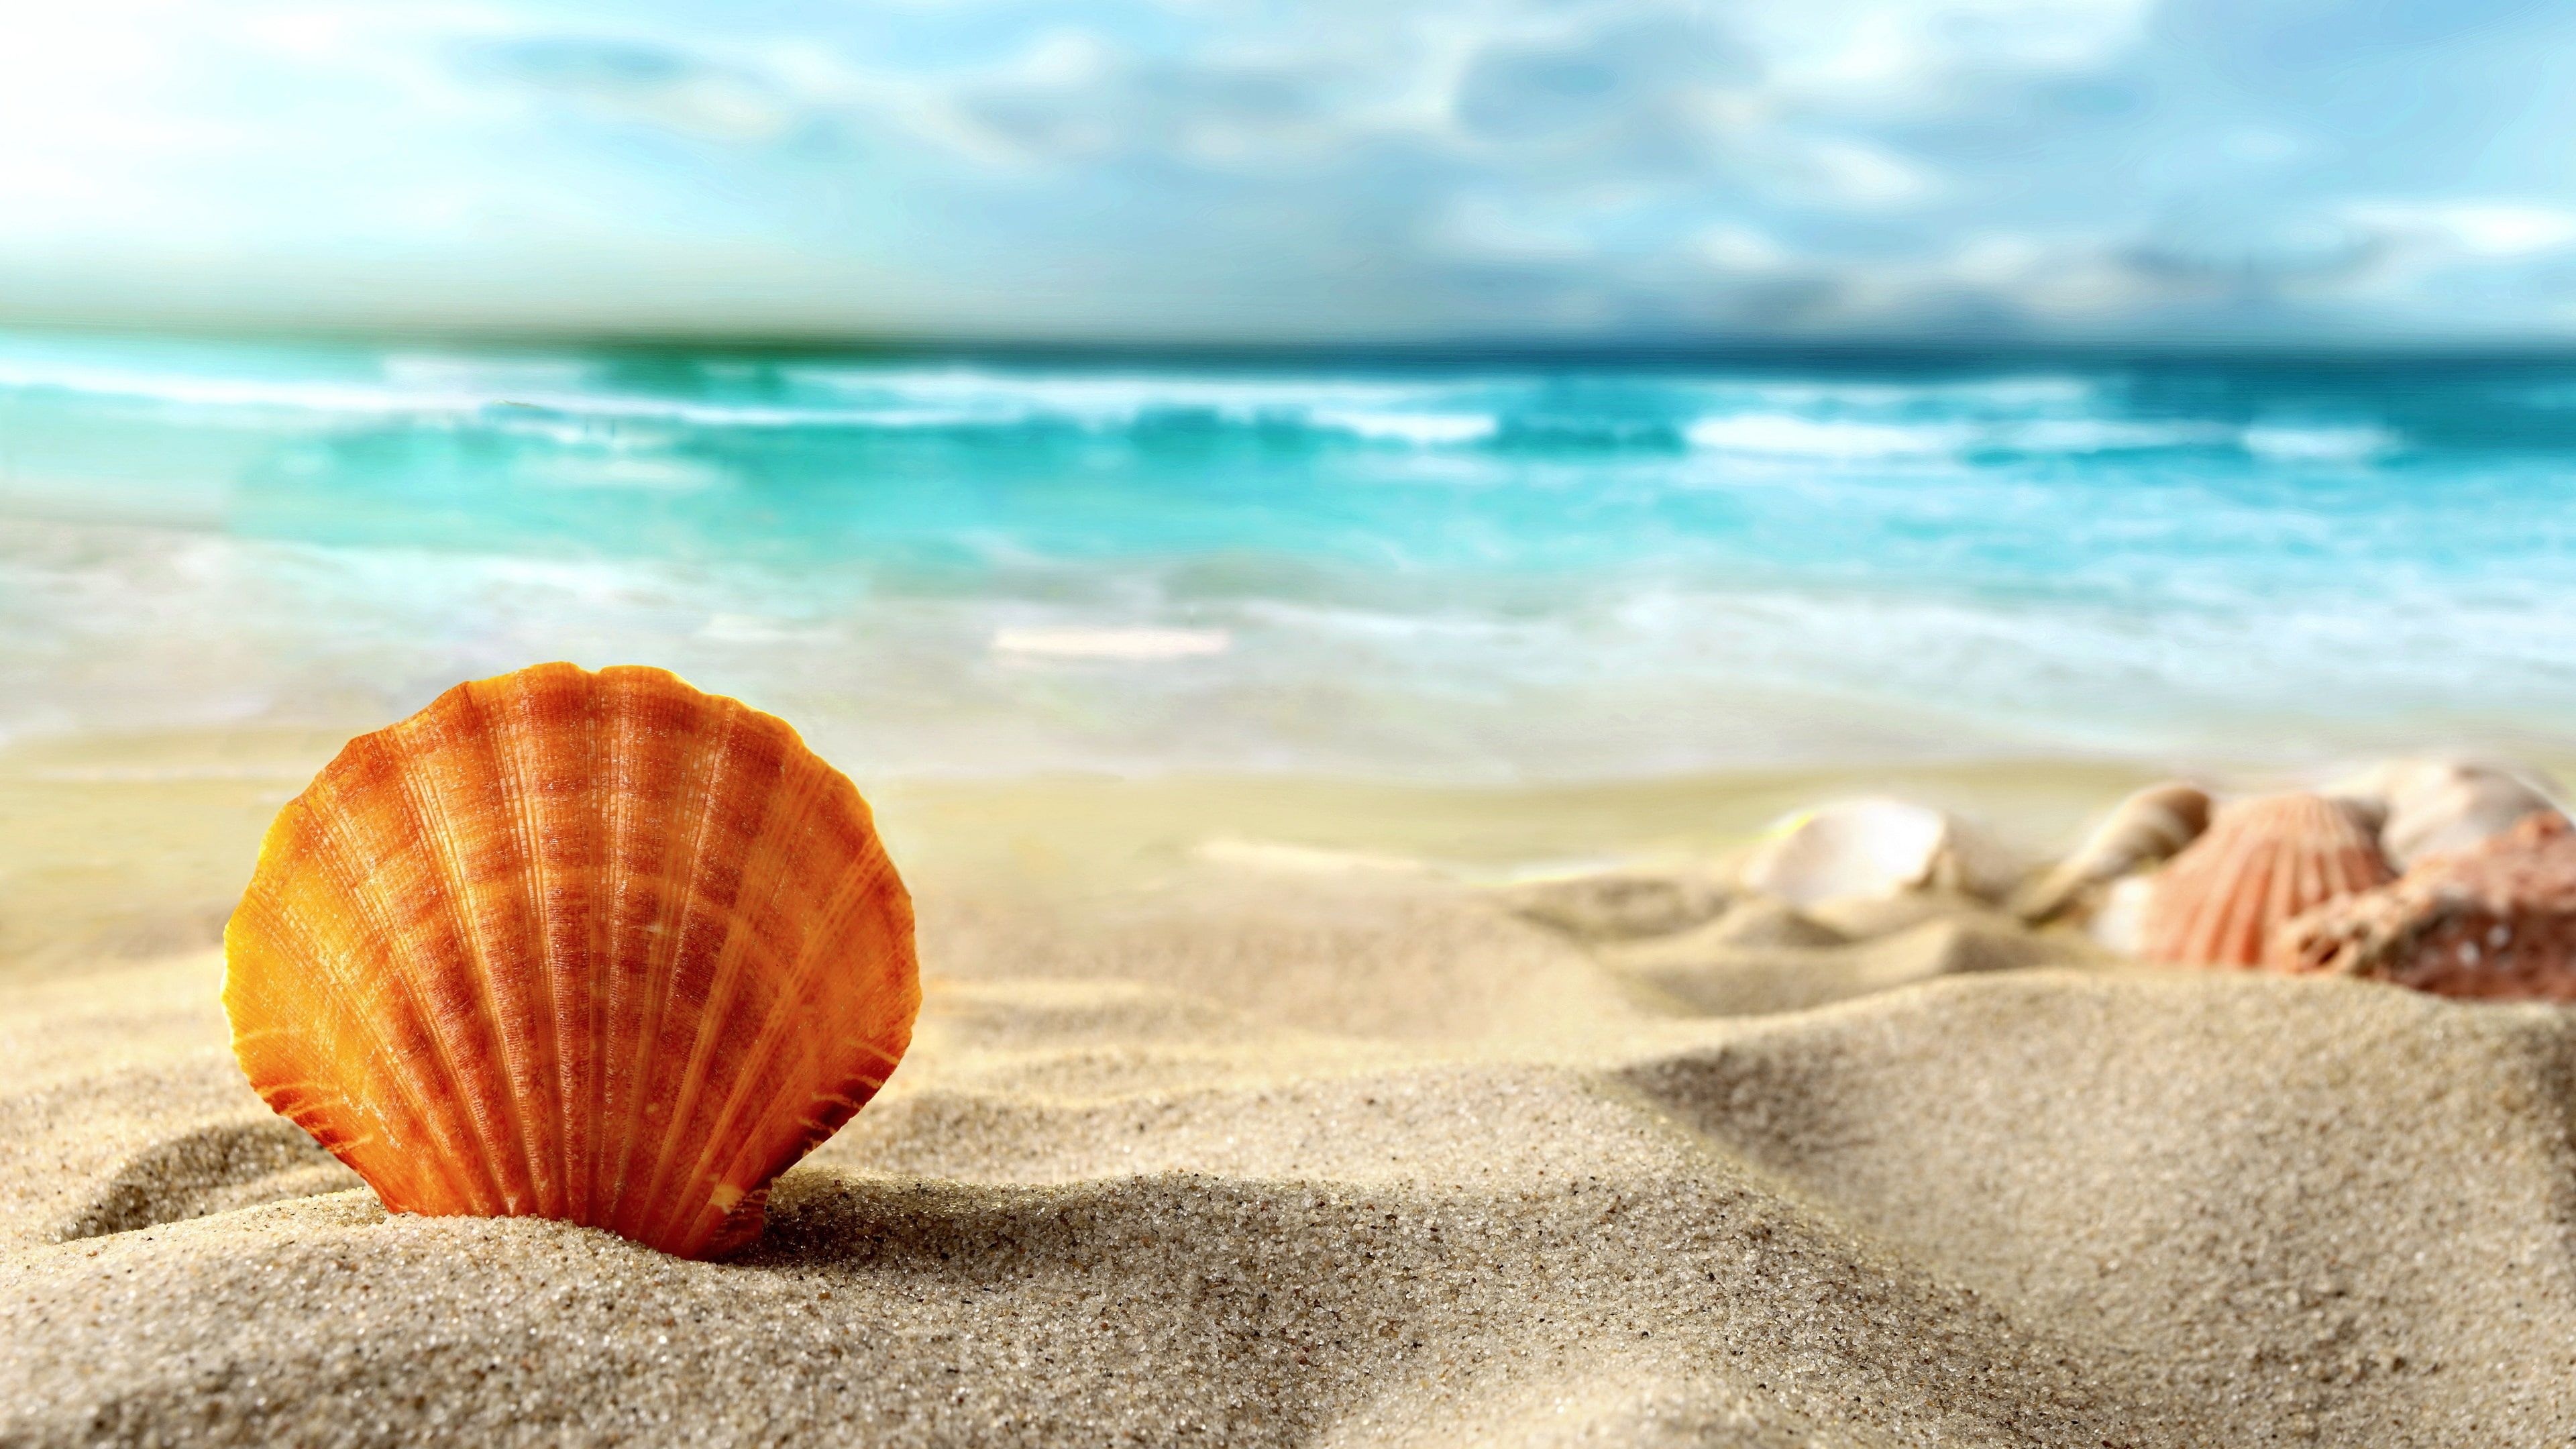 Sea Shell: Sands, Typically composed of calcium carbonate or chitin. 3840x2160 4K Wallpaper.